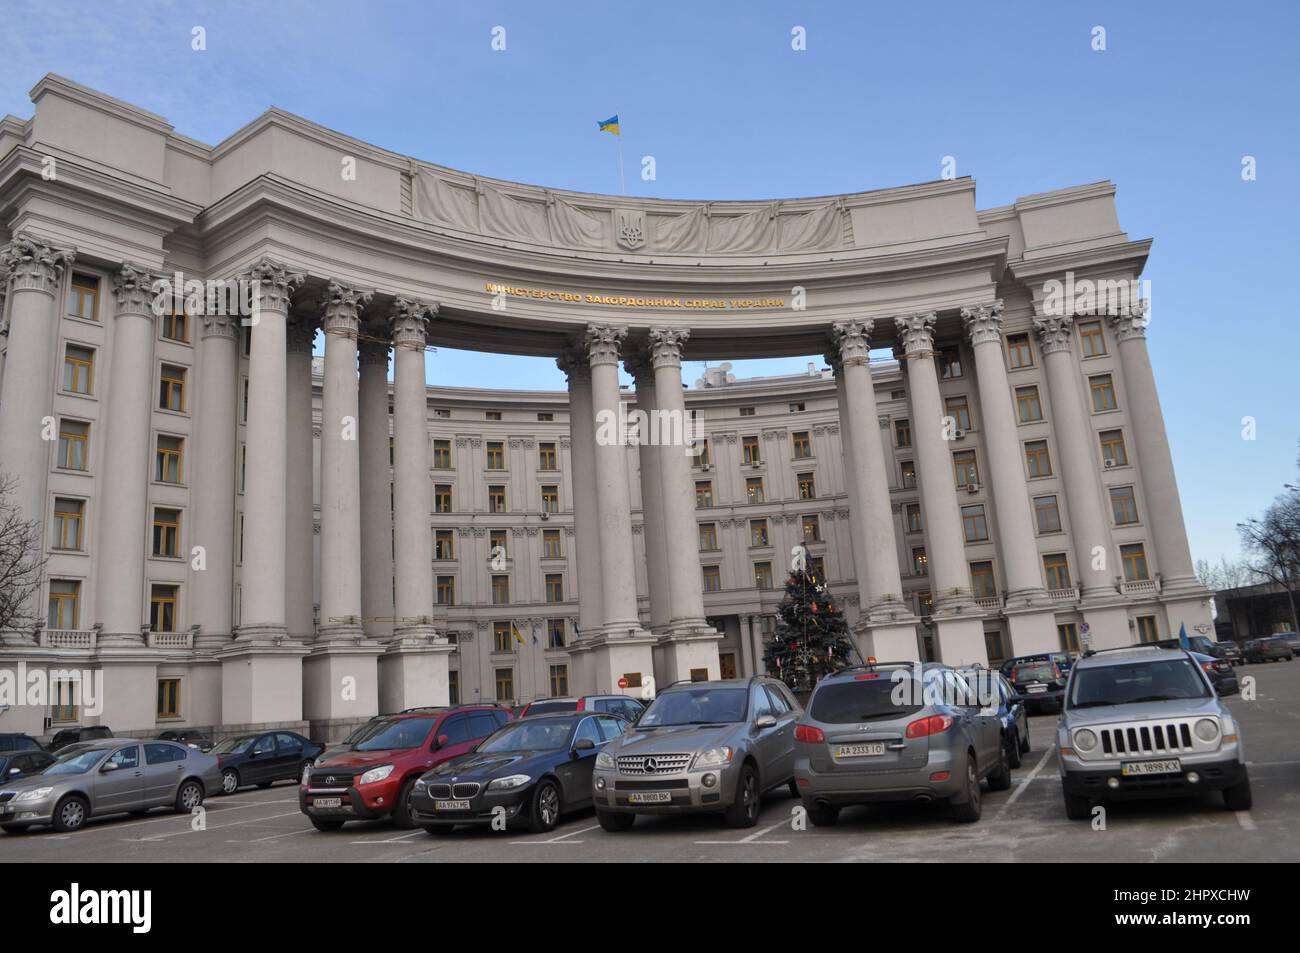 The main building of the Ministry of Foreign Affairs of Ukraine, a Ukrainian government building in historic Mykhailivska Square, Kyiv, Ukraine. Stock Photo